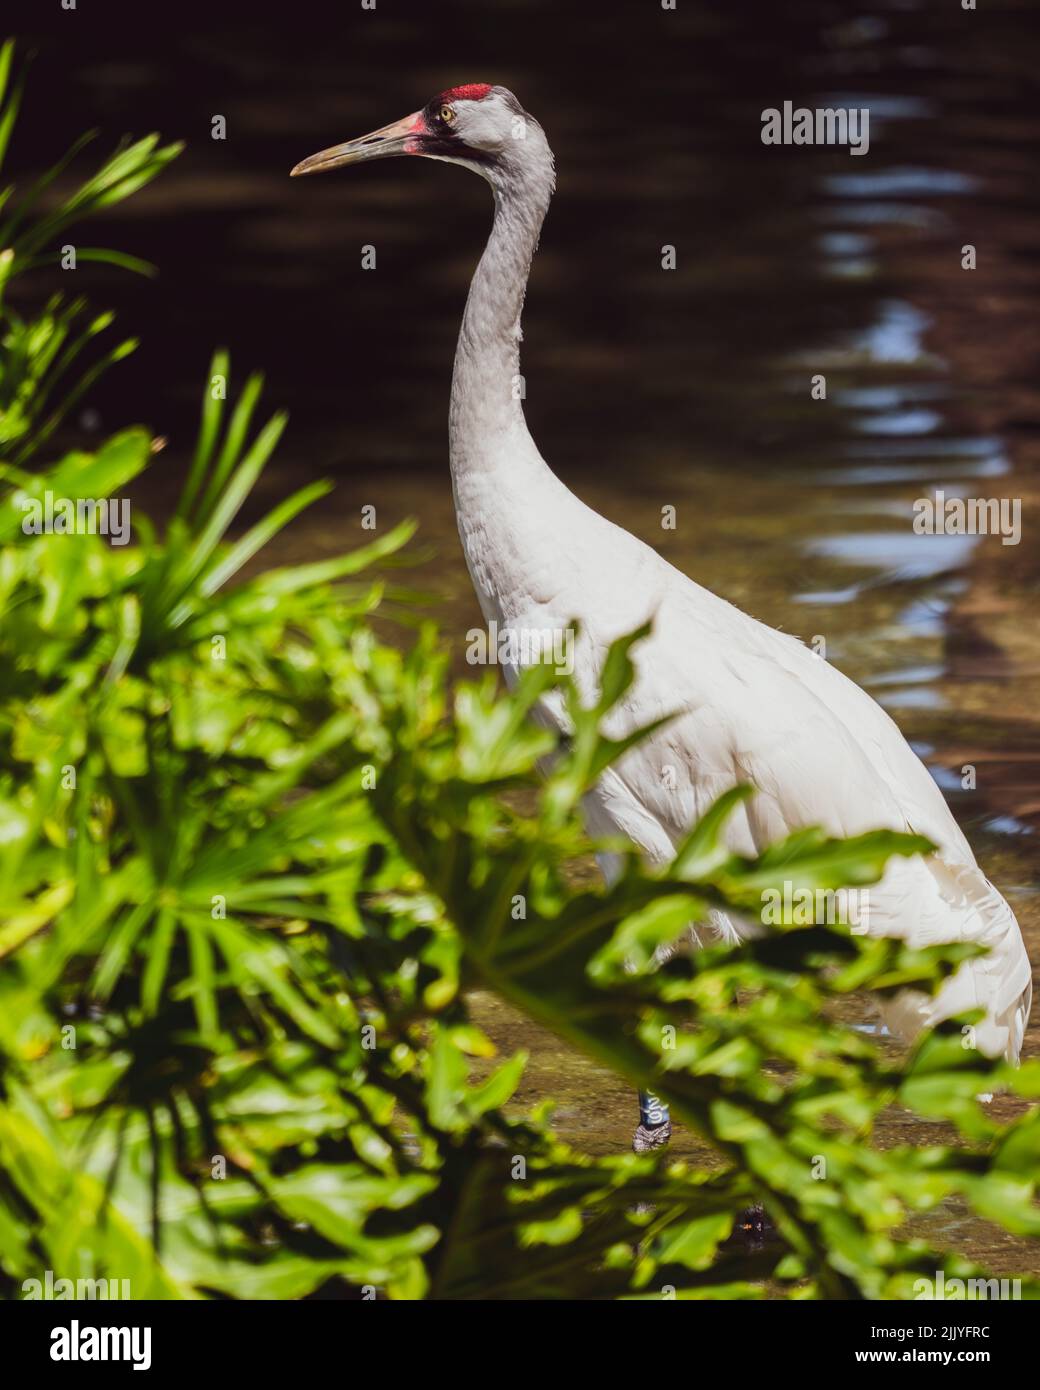 An American Crane bird from behind the plants Stock Photo